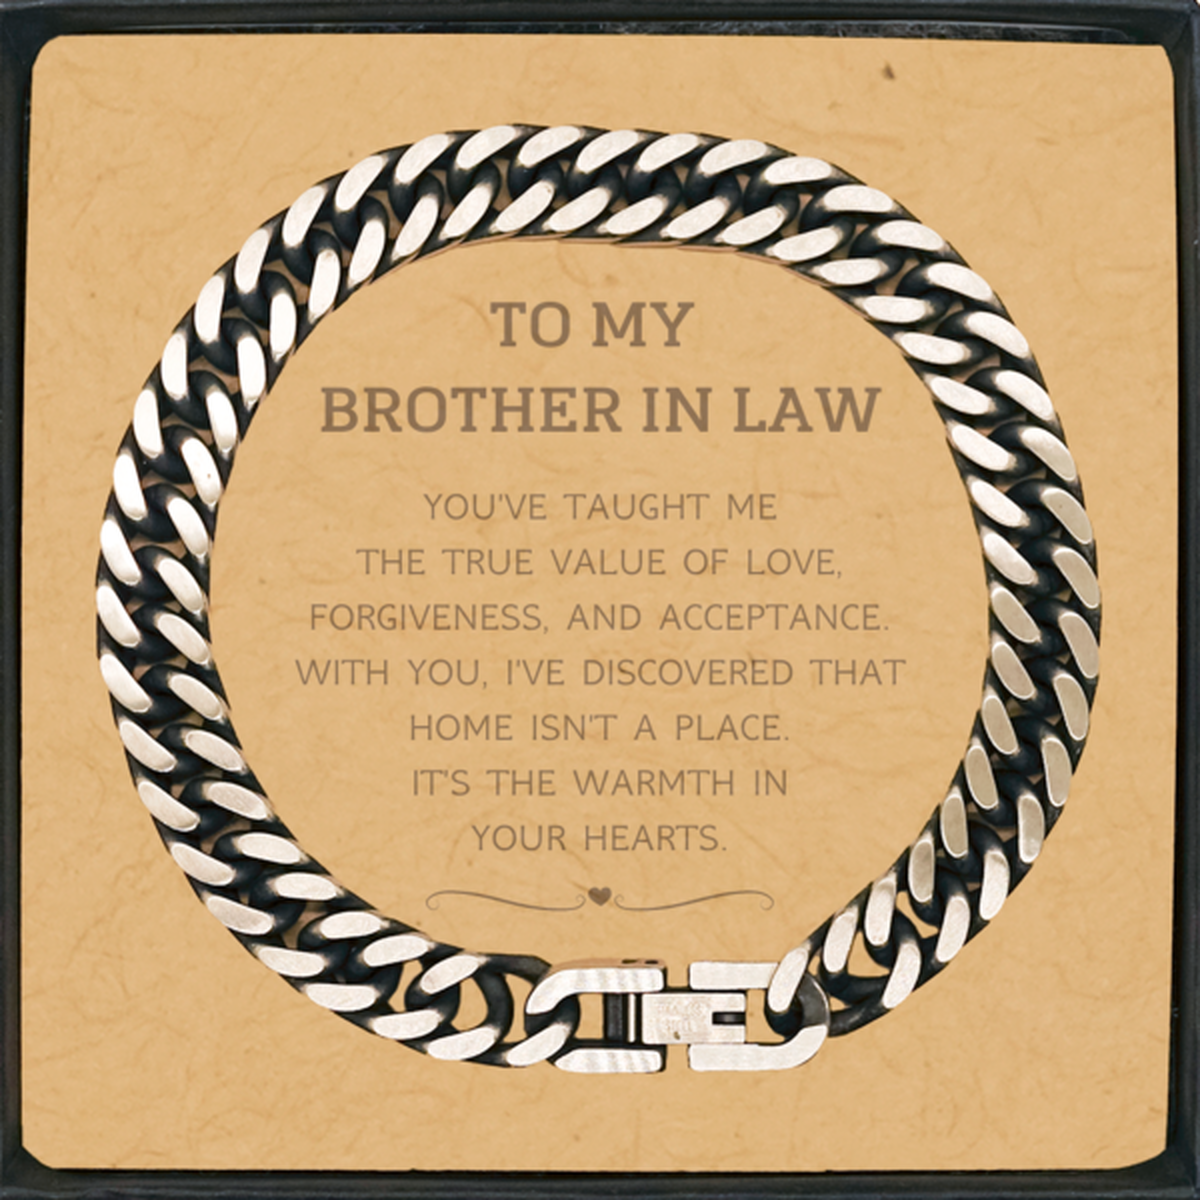 To My Brother In Law Gifts, You've taught me the true value of love, Thank You Gifts For Brother In Law, Birthday Cuban Link Chain Bracelet For Brother In Law